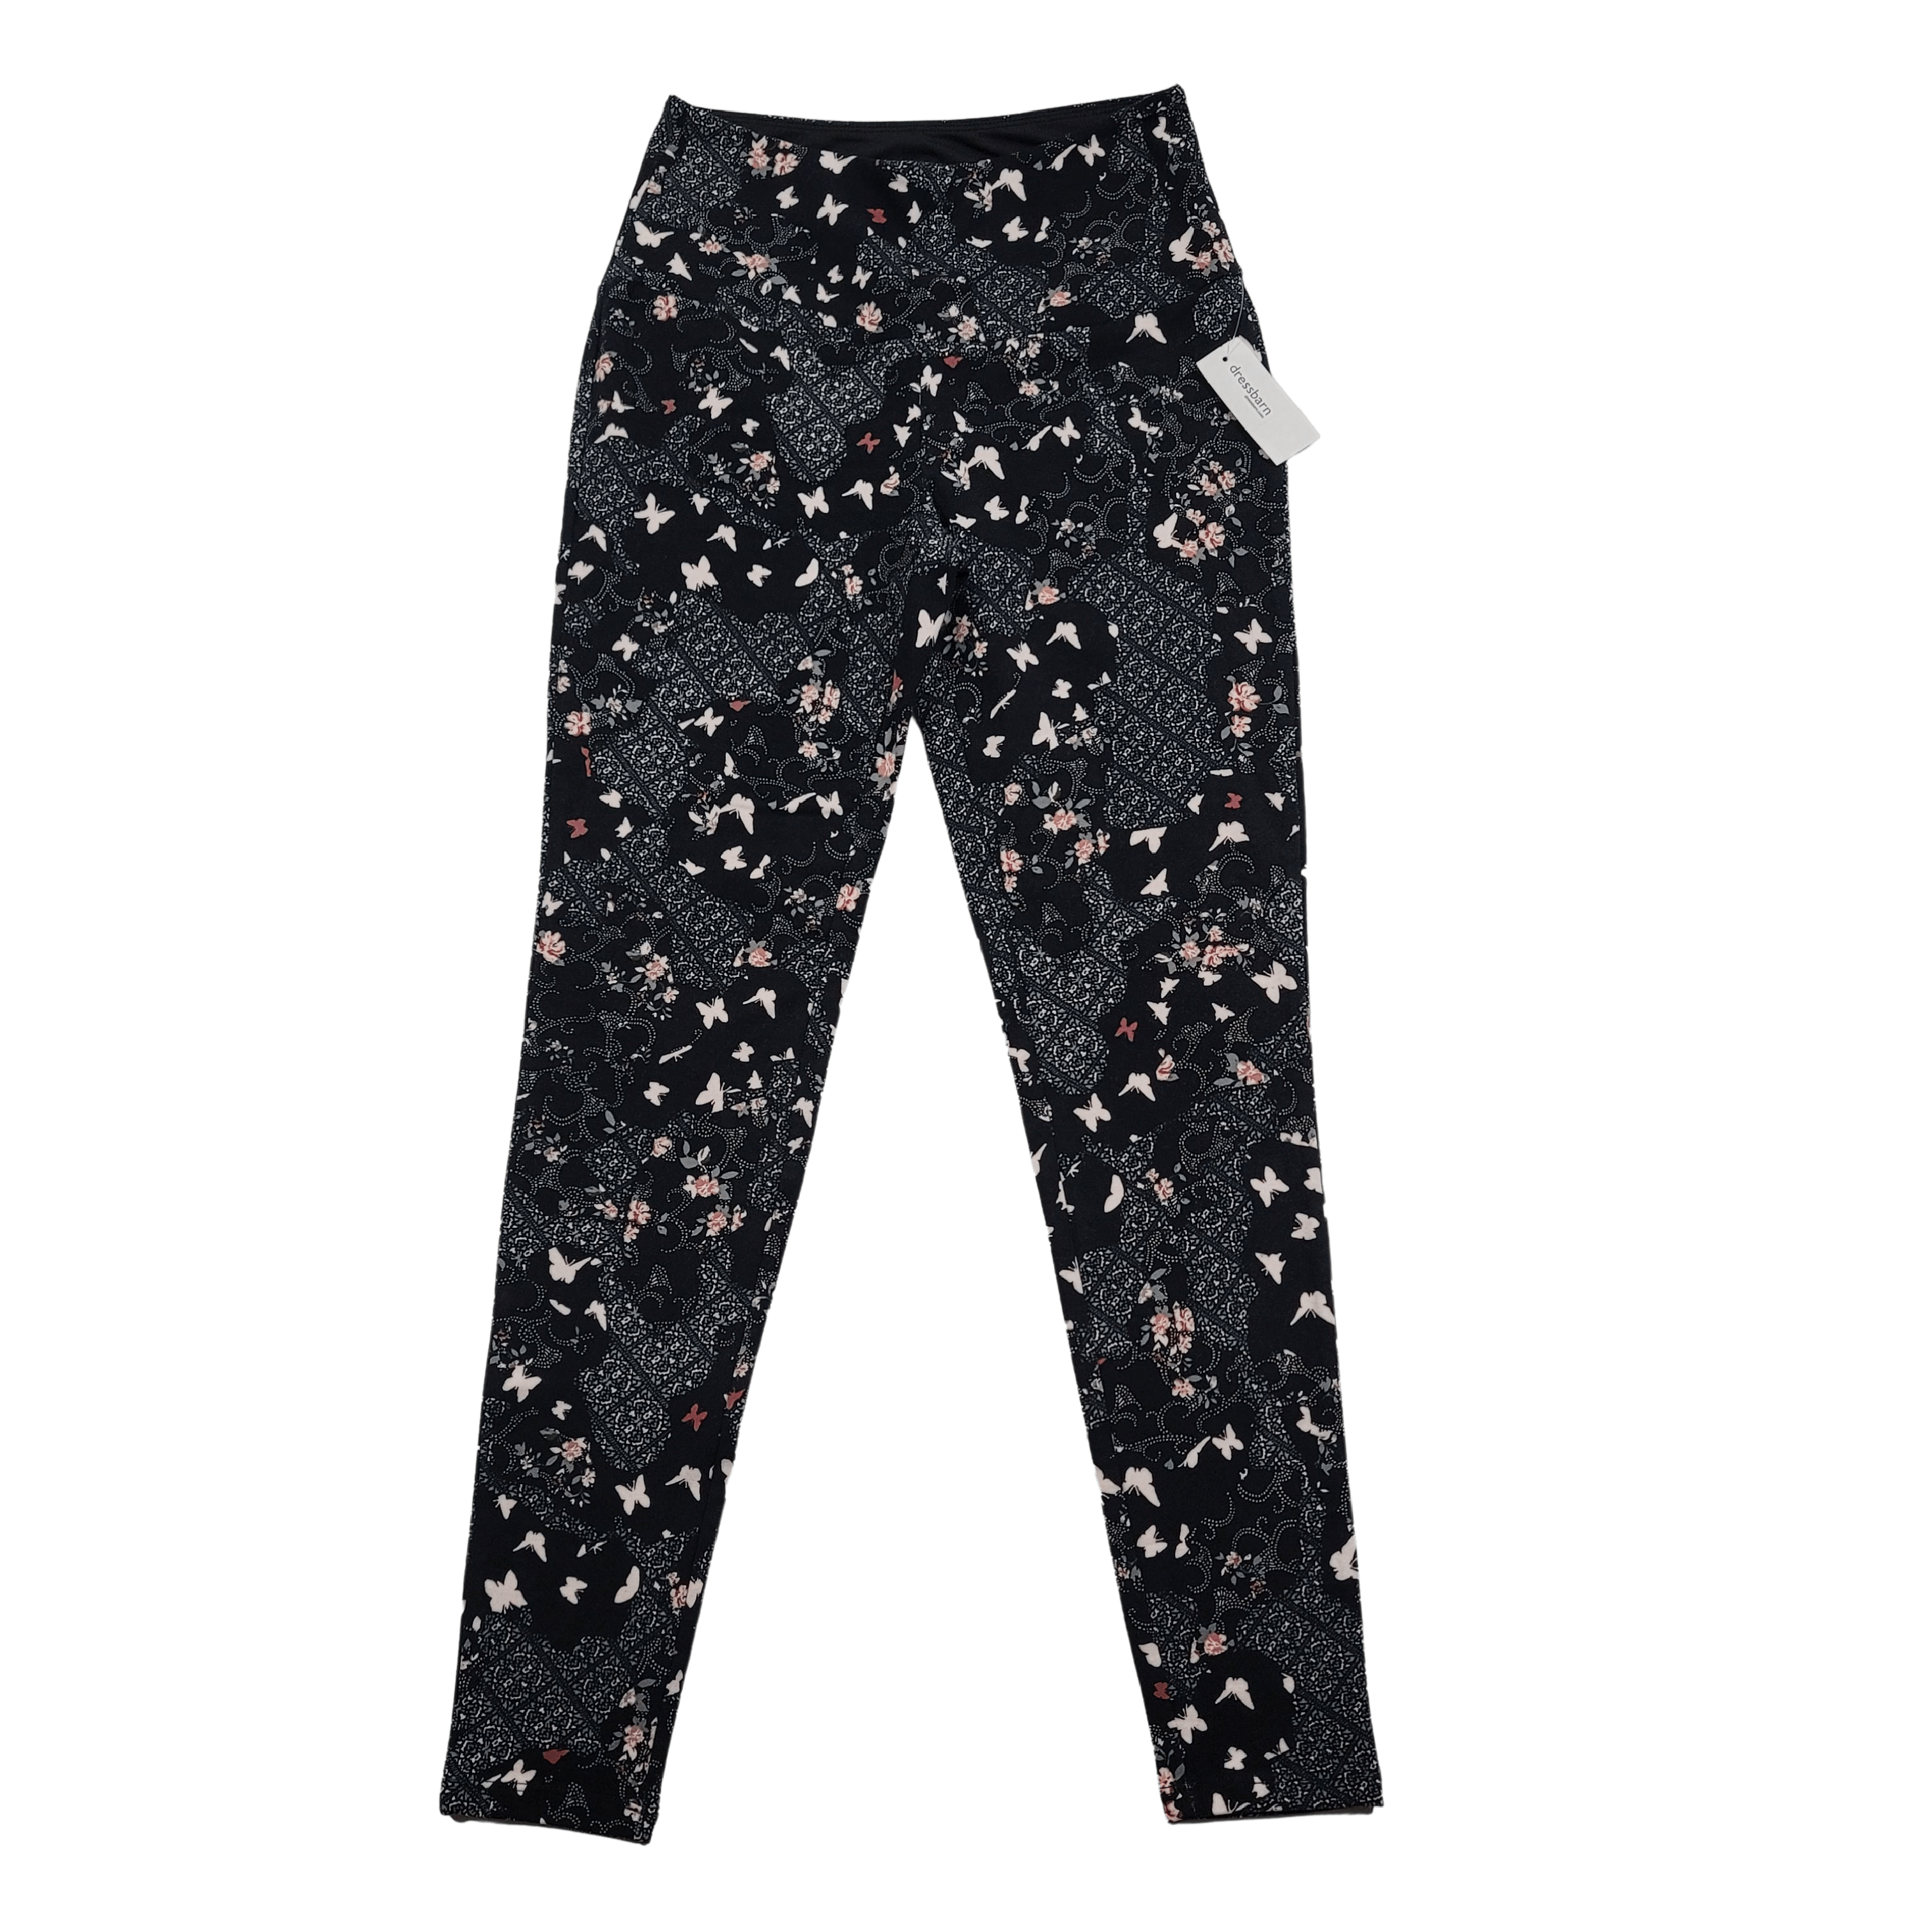 Db Sunday Floral/Butterfly Leggings (Size S)